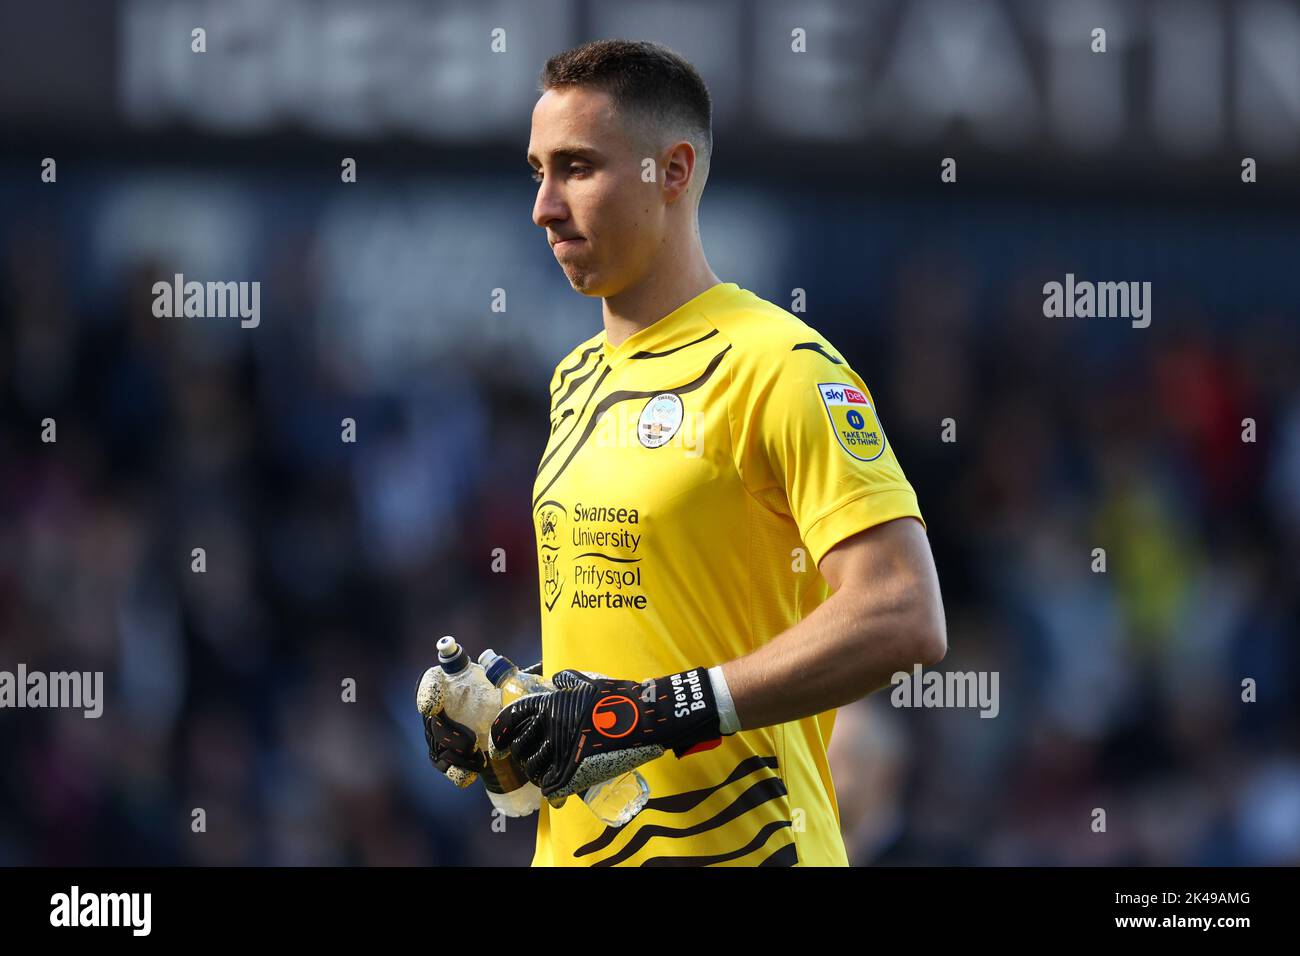 Steven Benda #13 of Swansea City during the Sky Bet Championship match West Bromwich Albion vs Swansea City at The Hawthorns, West Bromwich, United Kingdom, 1st October 2022  (Photo by Simon Bissett/News Images) Stock Photo